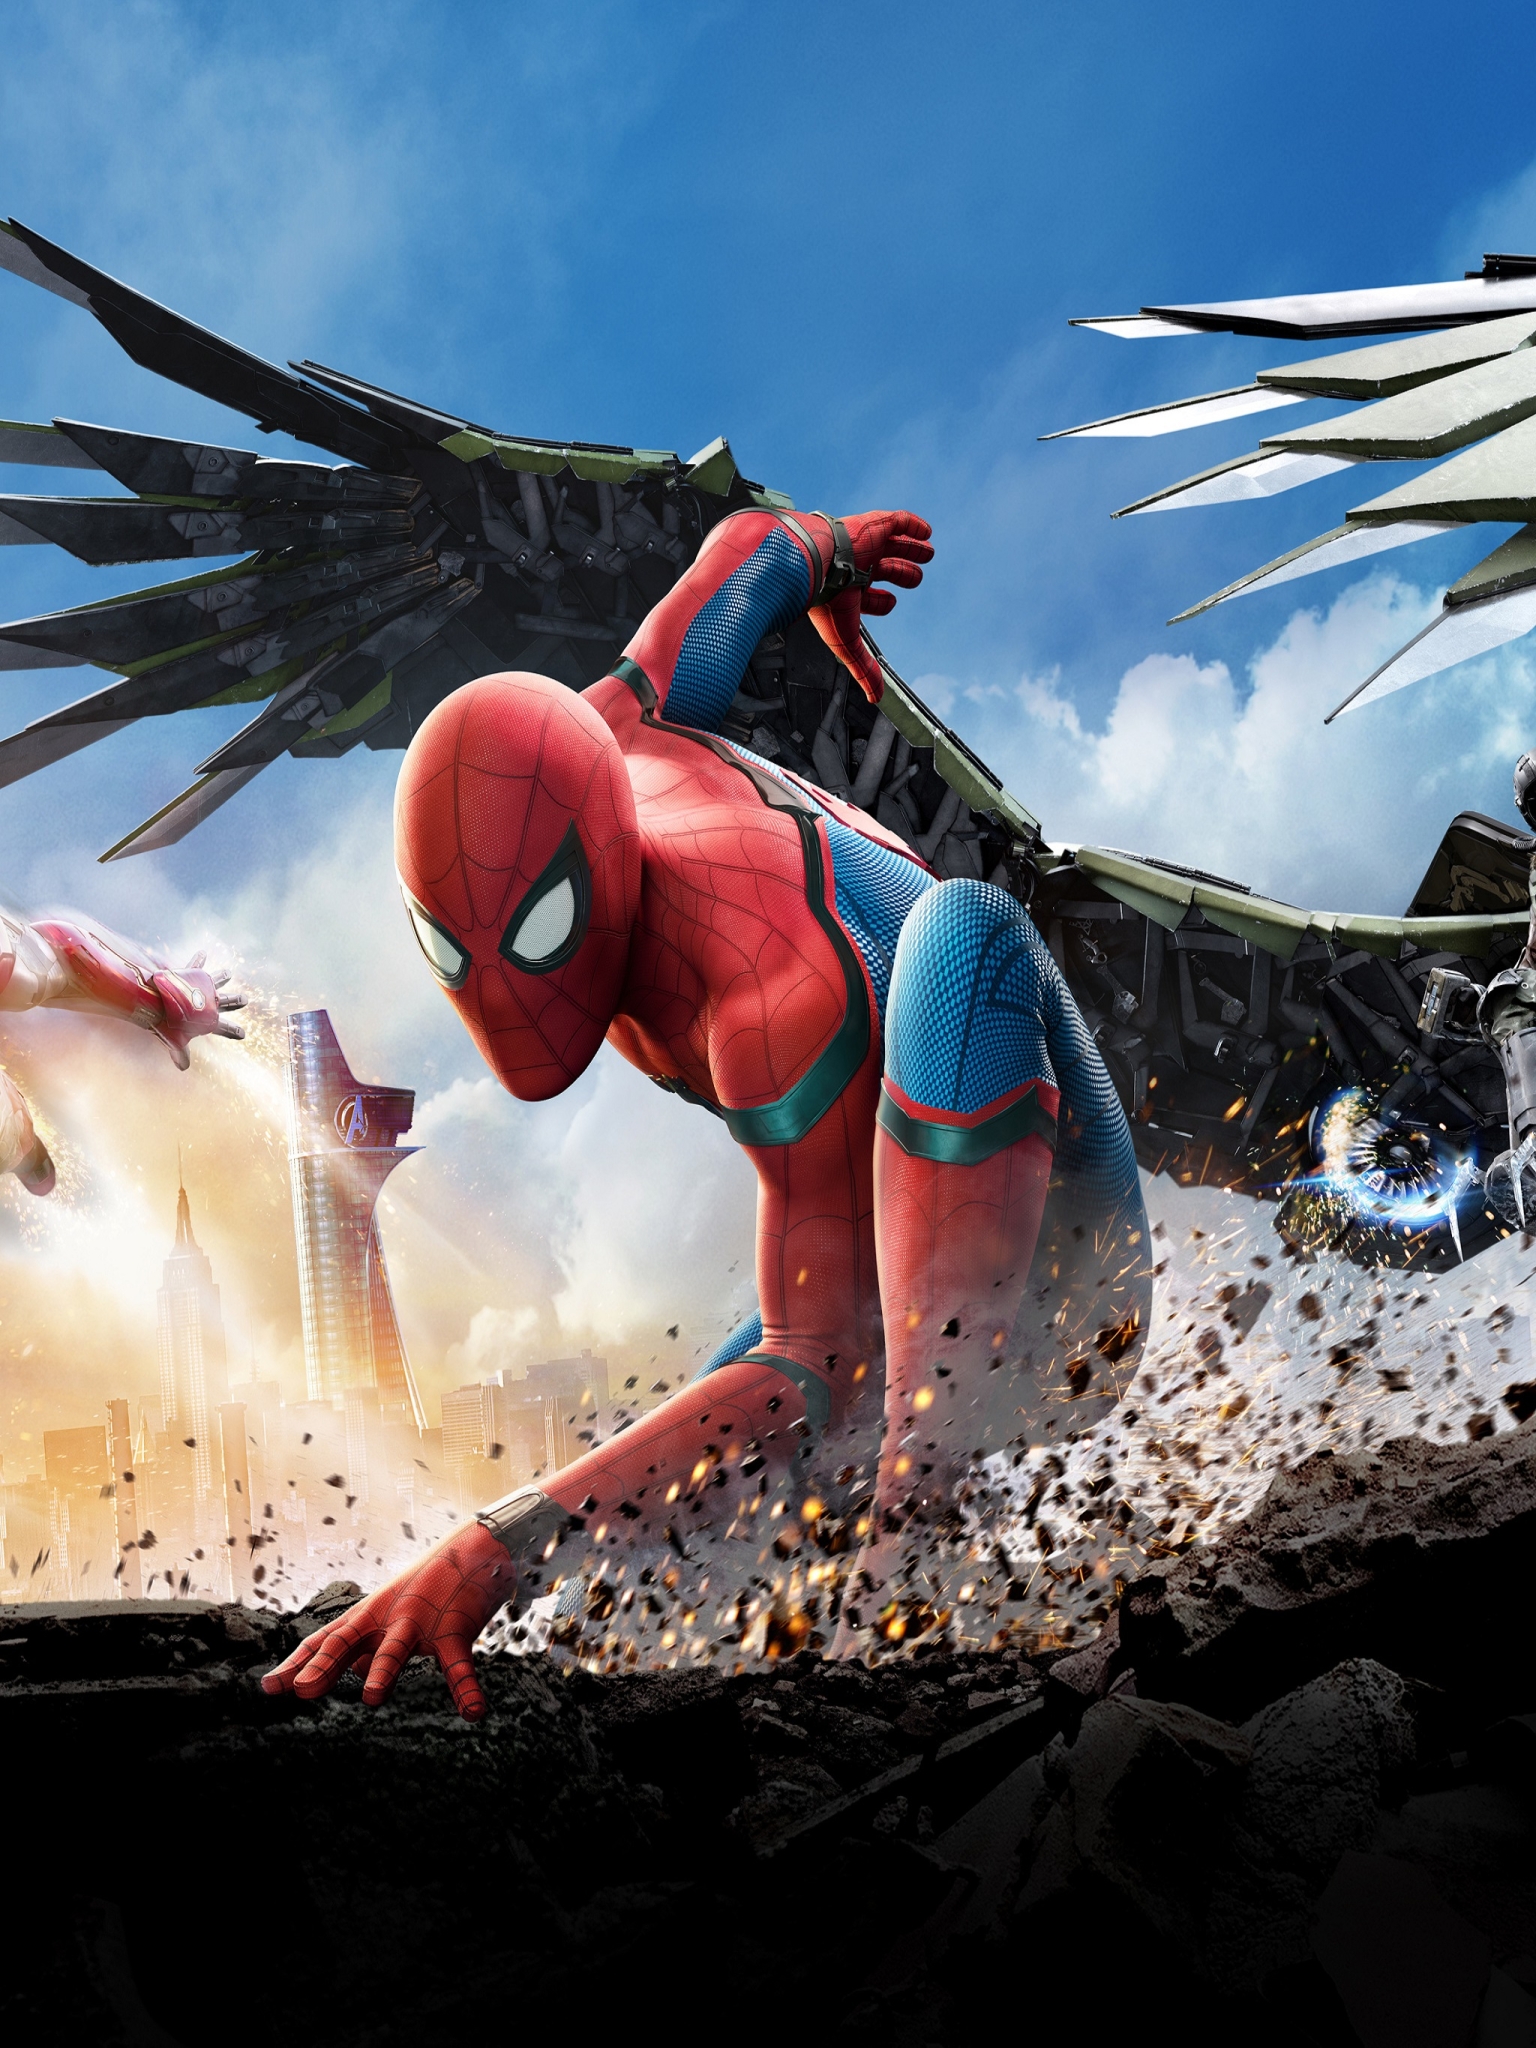 Spiderman Home Coming 2017 for Apple iPad Air 2 resolution